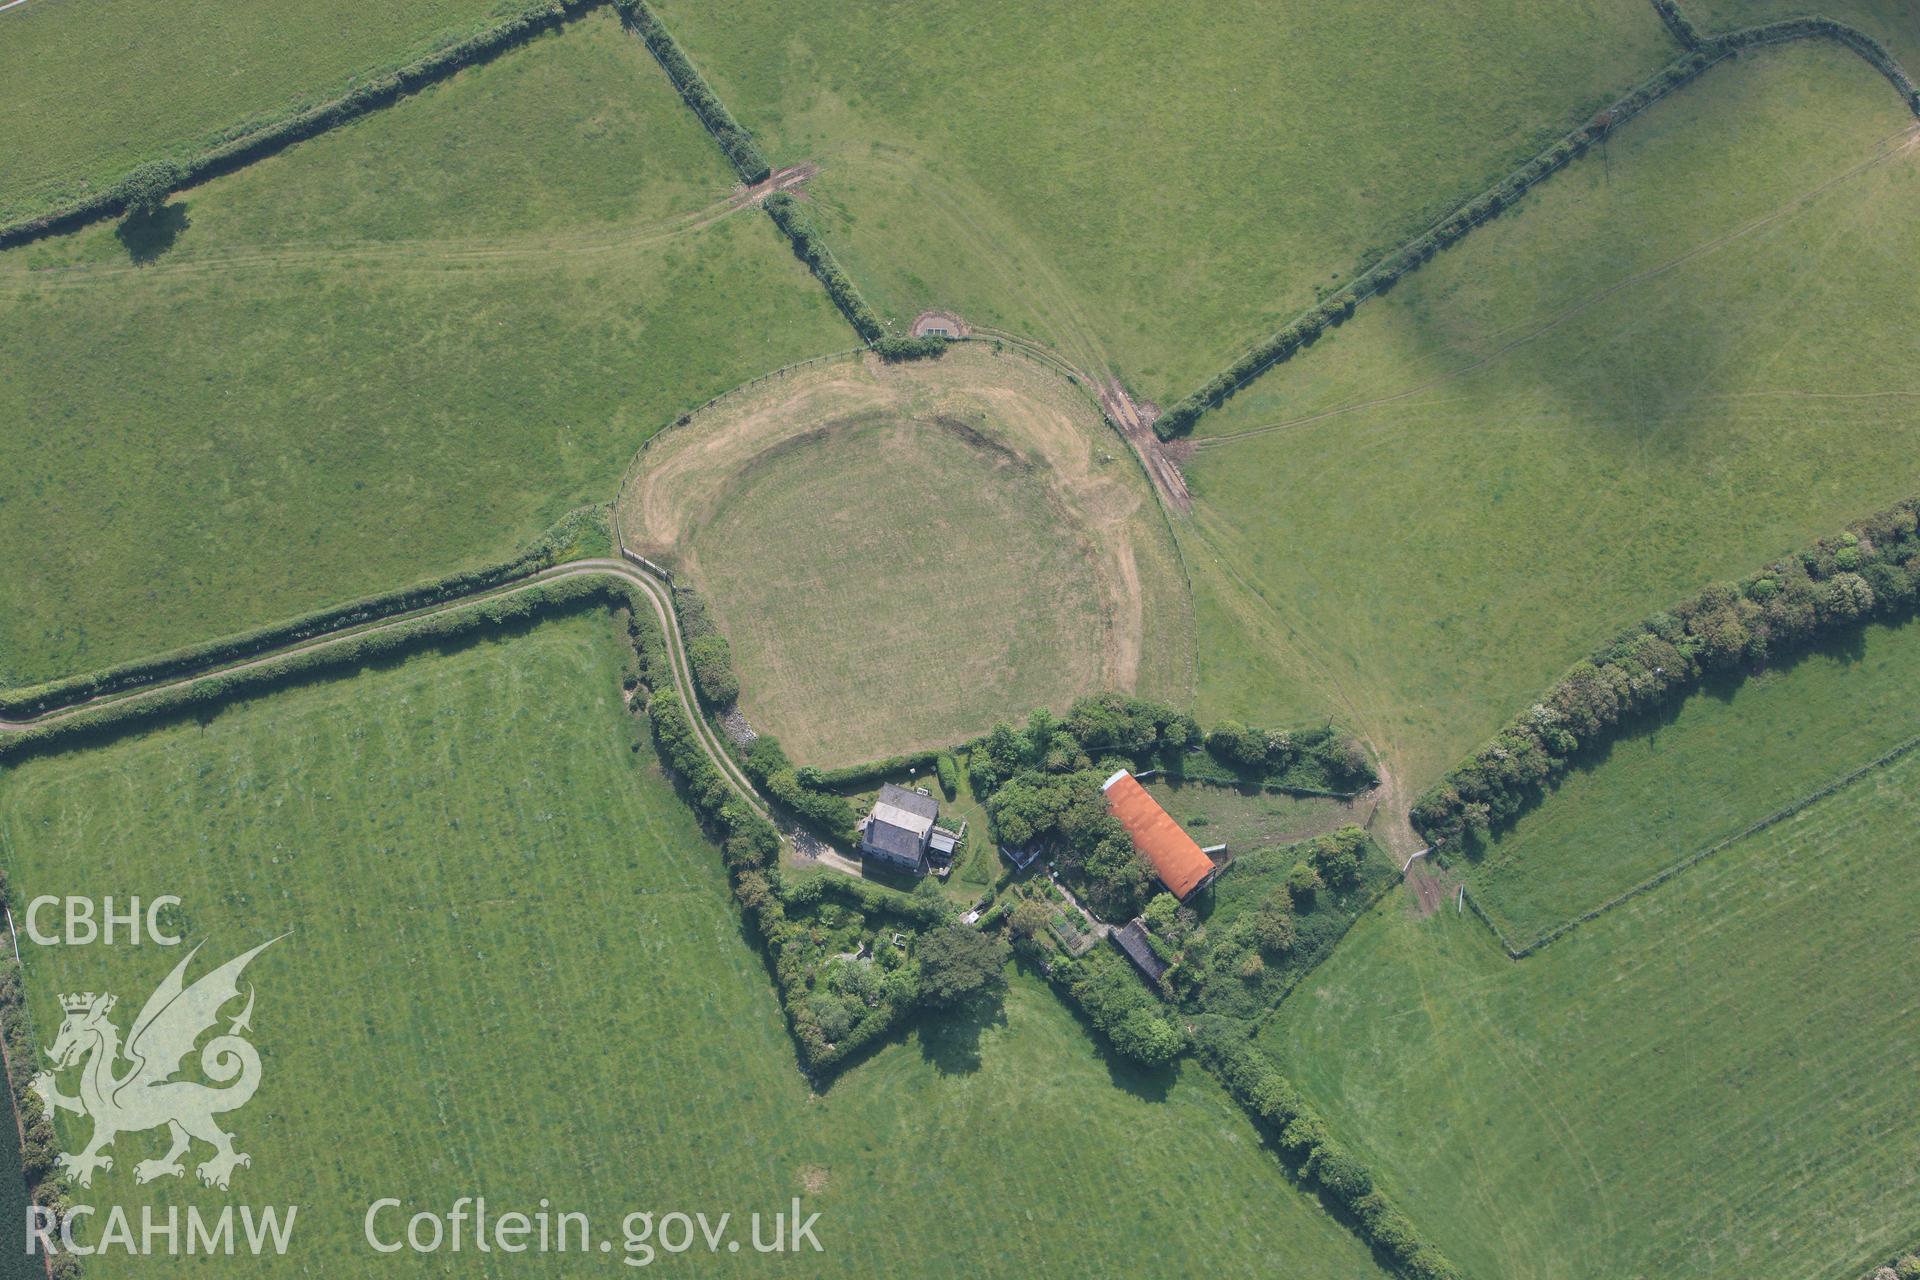 RCAHMW colour oblique photograph of Castell Bryn Gwyn, Neolithic henge and later ringwork. Taken by Toby Driver on 10/06/2010.